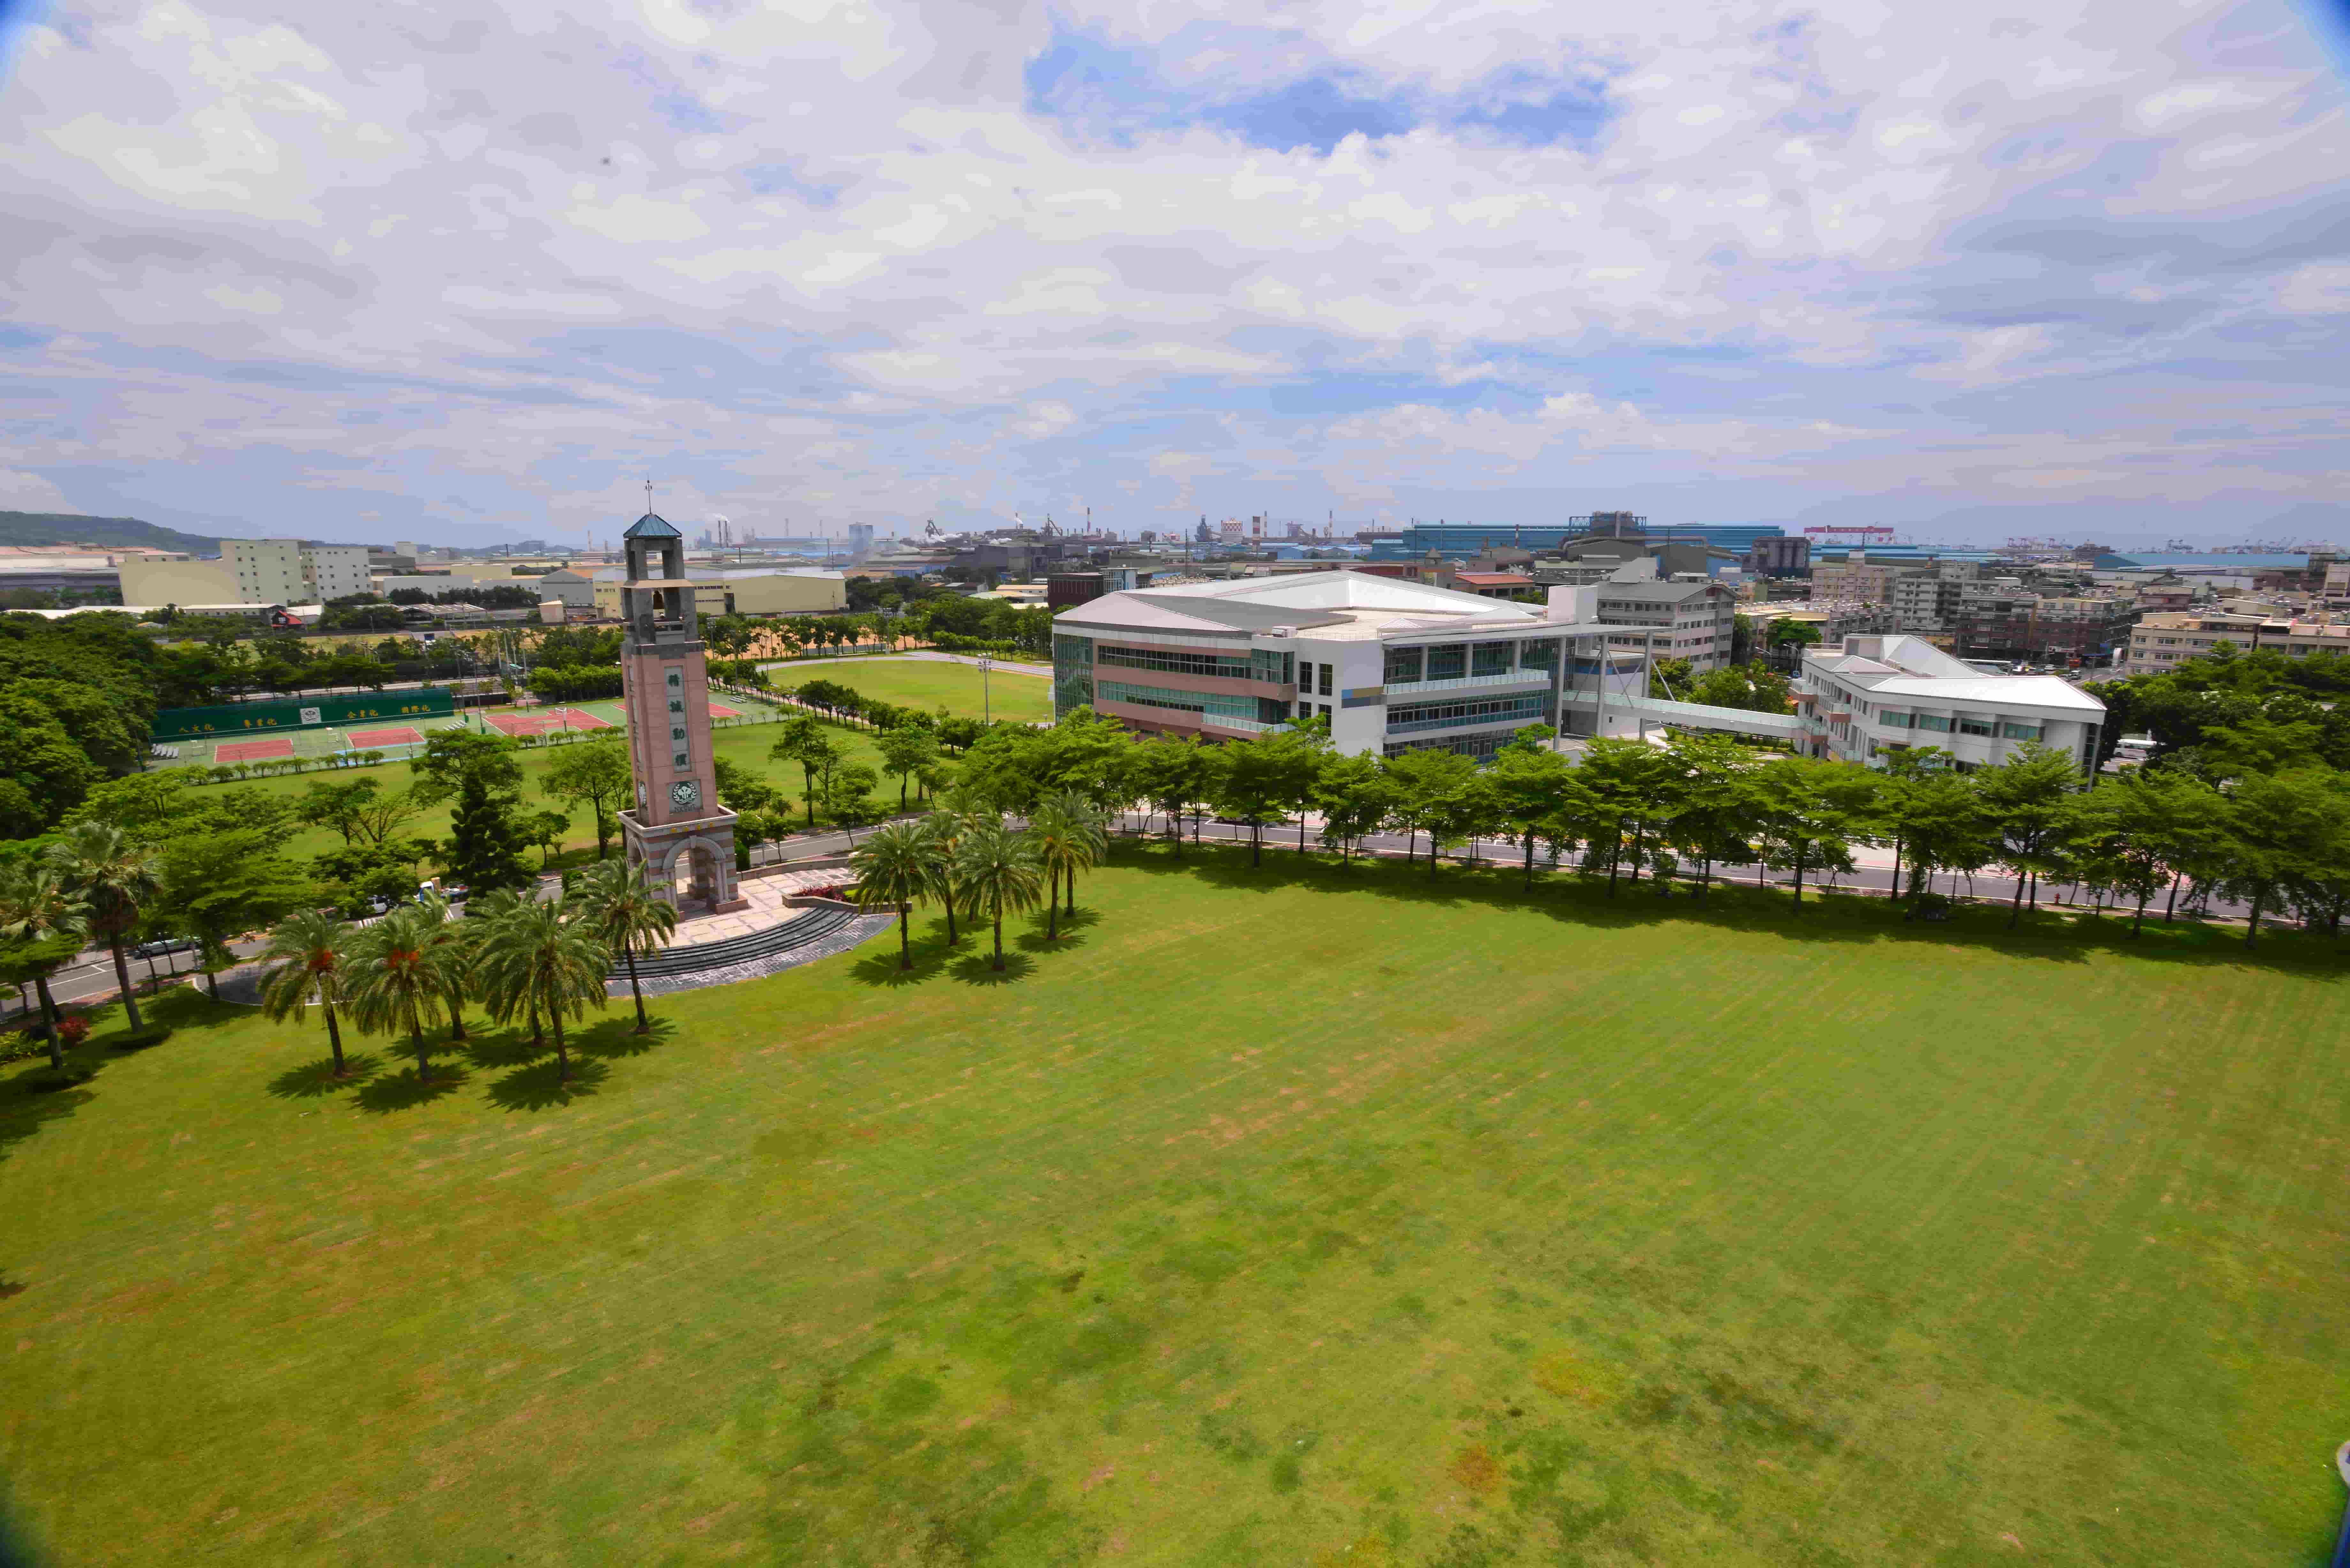 kaohsiung university of hospitality and tourism